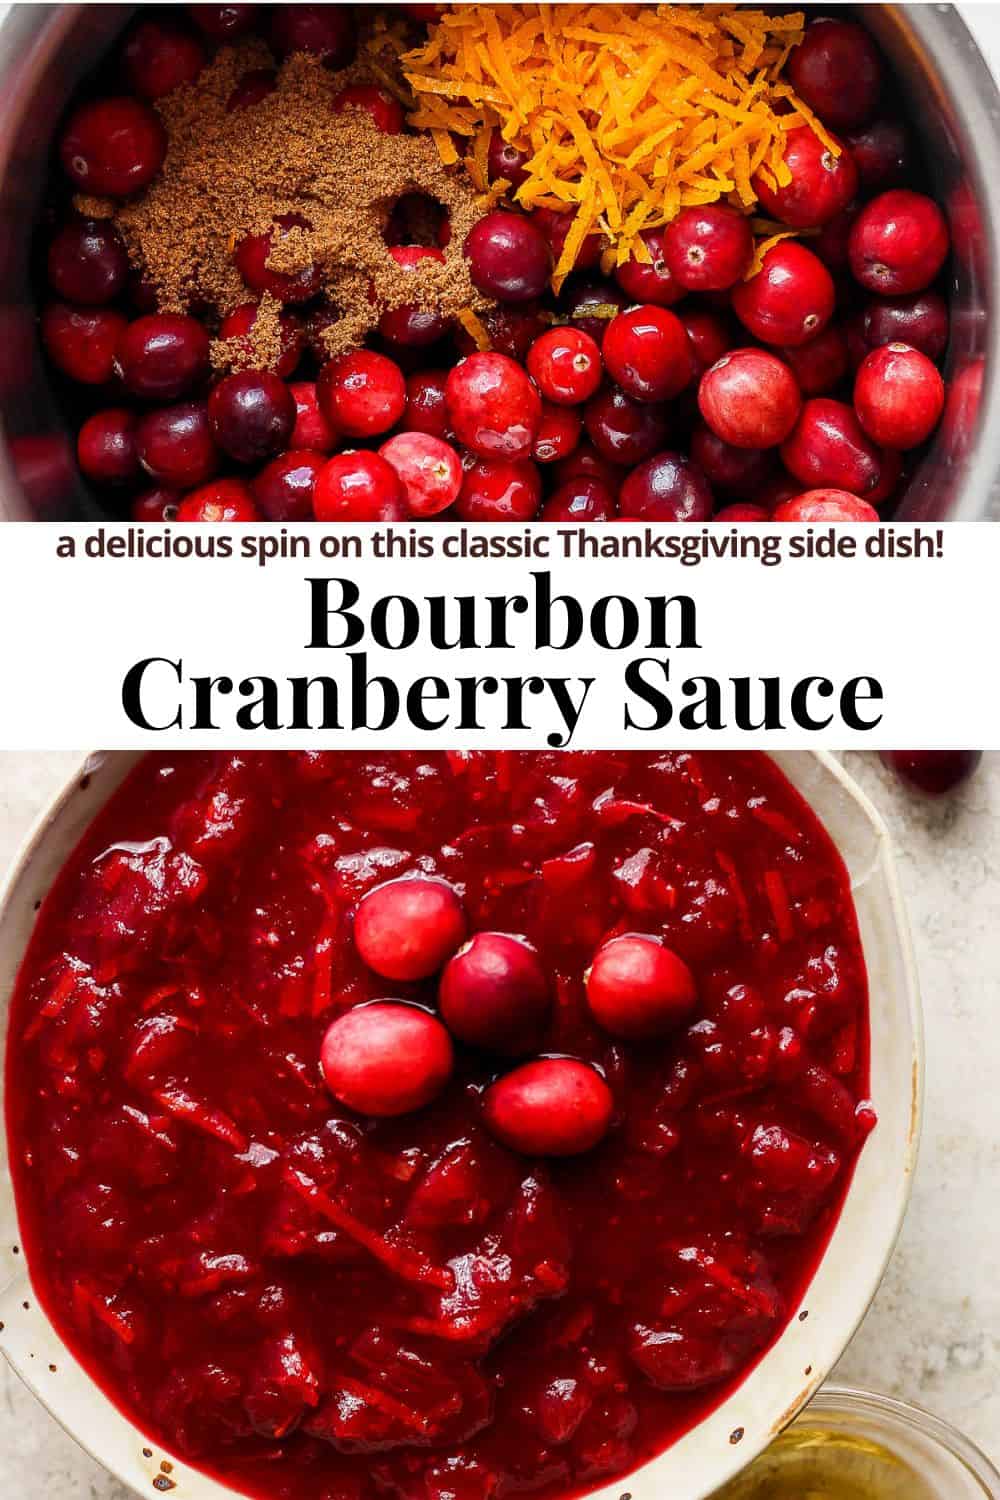 Pinterest image showing bourbon cranberry sauce with the title, "bourbon cranberry sauce. A delicious spin on this classic Thanksgiving side dish!"